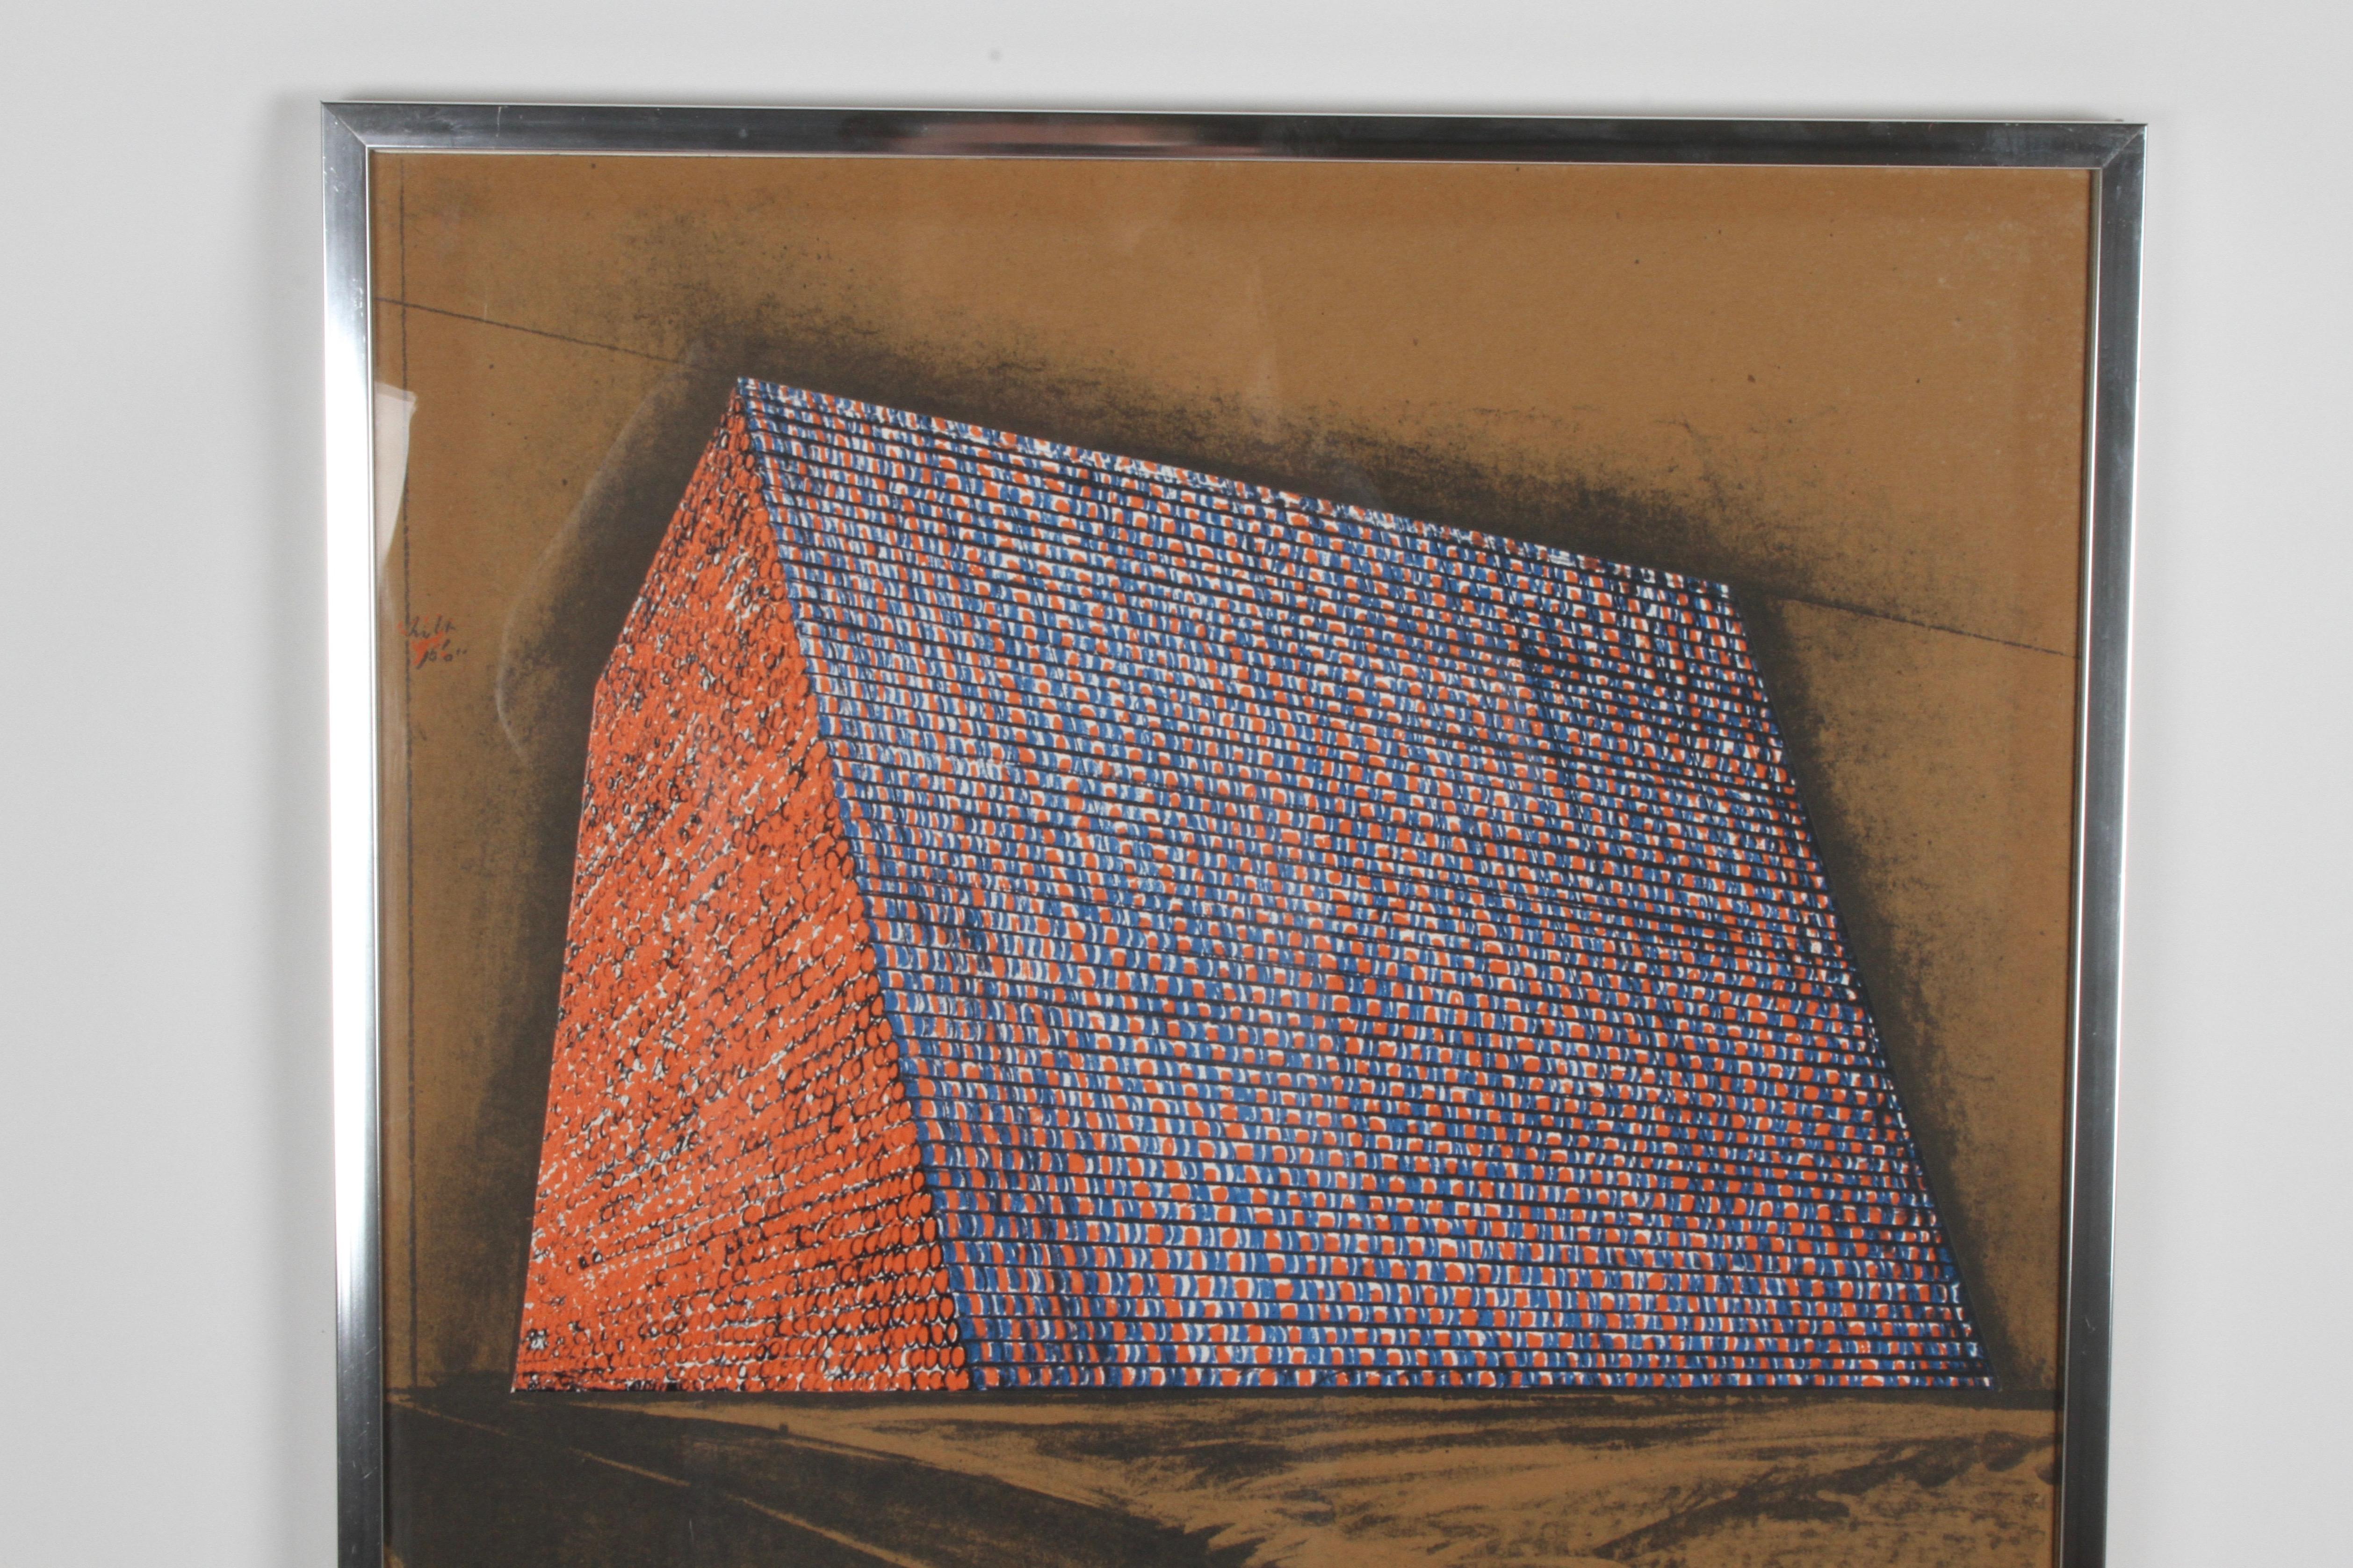 Christo (1935-2020) Bulgarian. The TEXAS MASTABA, PROJECT FOR 500,000 STACKED OIL DRUMS (S. 85), 1976, color lithograph & screenprint collage on 1/8” brown board, signed and numbered 45/200 in pencil, printed by Styria Studios New York, published by